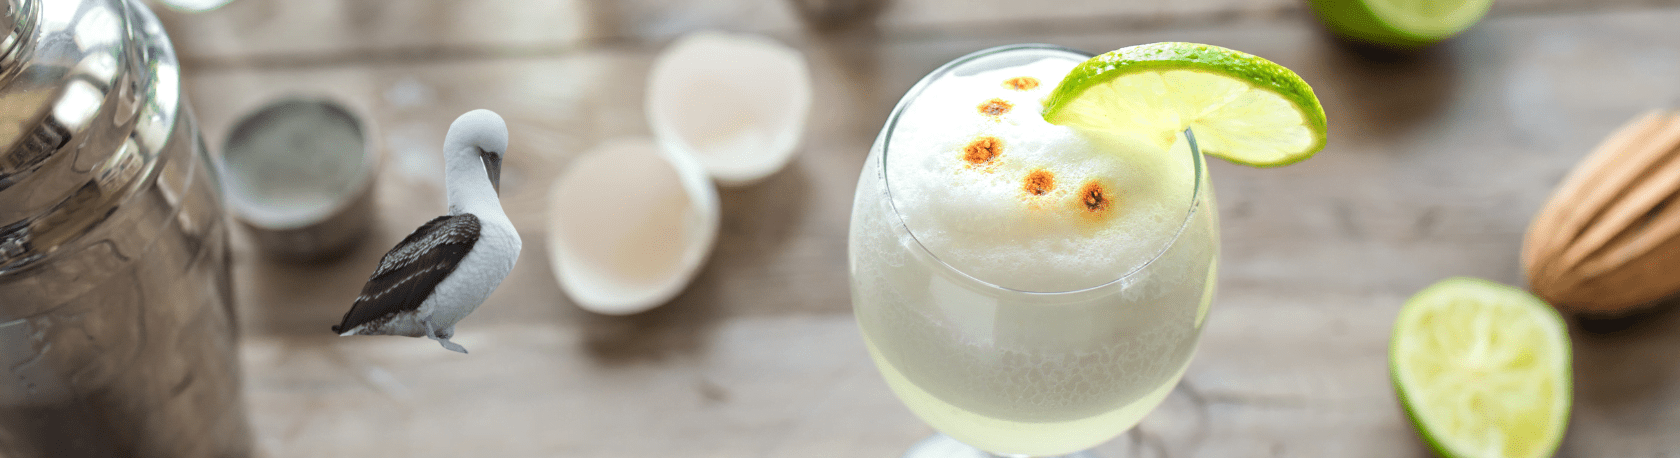 Enhance your Spanish vocabulary and cultural knowledge while learning about the origins of the word ‘pisco’